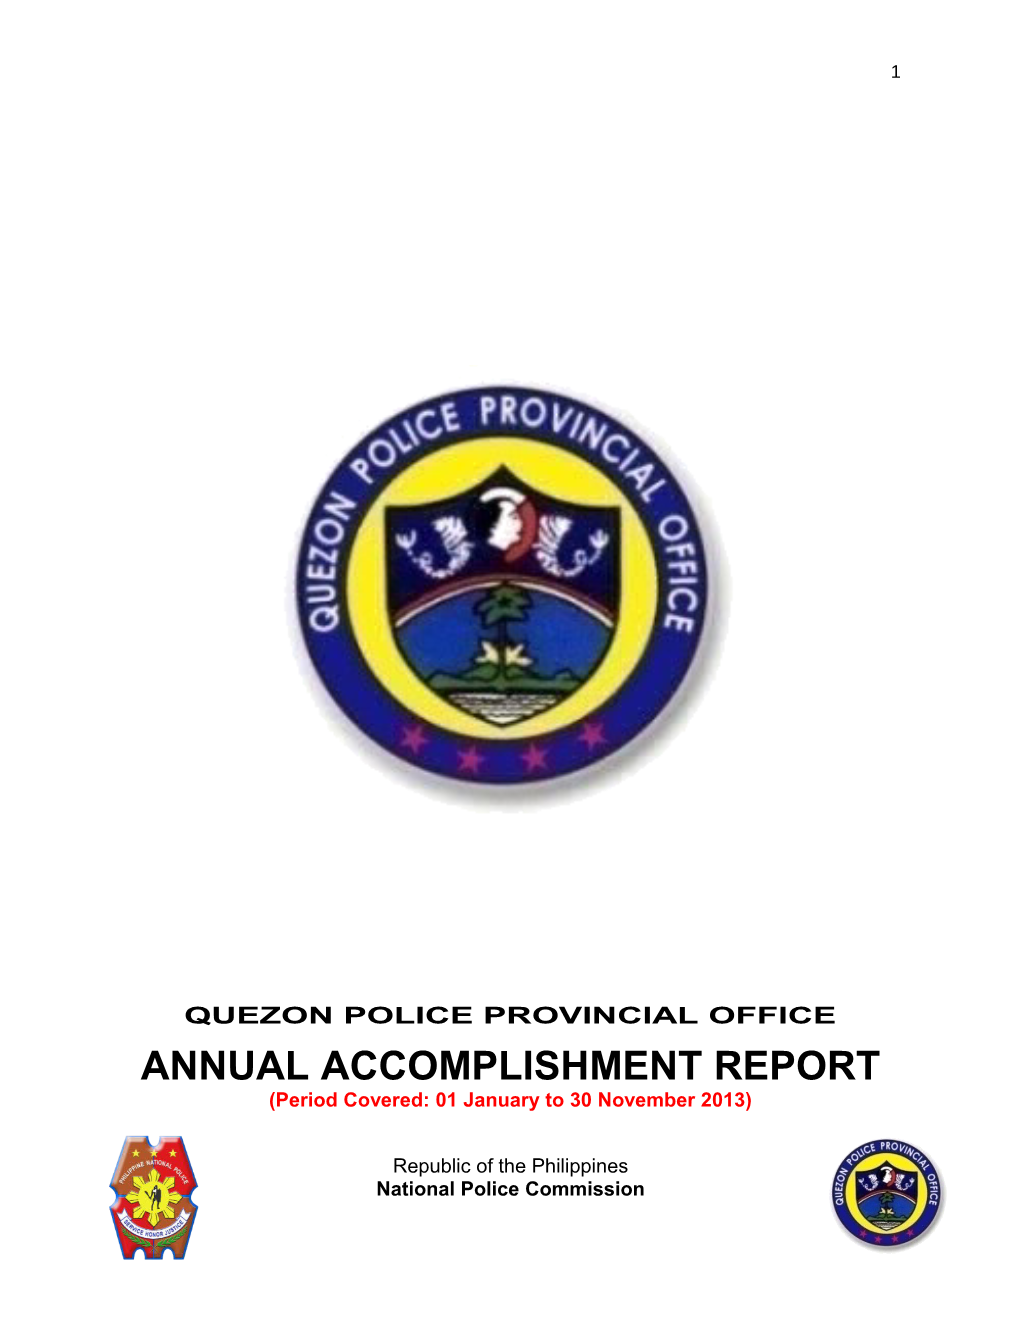 ANNUAL ACCOMPLISHMENT REPORT (Period Covered: 01 January to 30 November 2013)